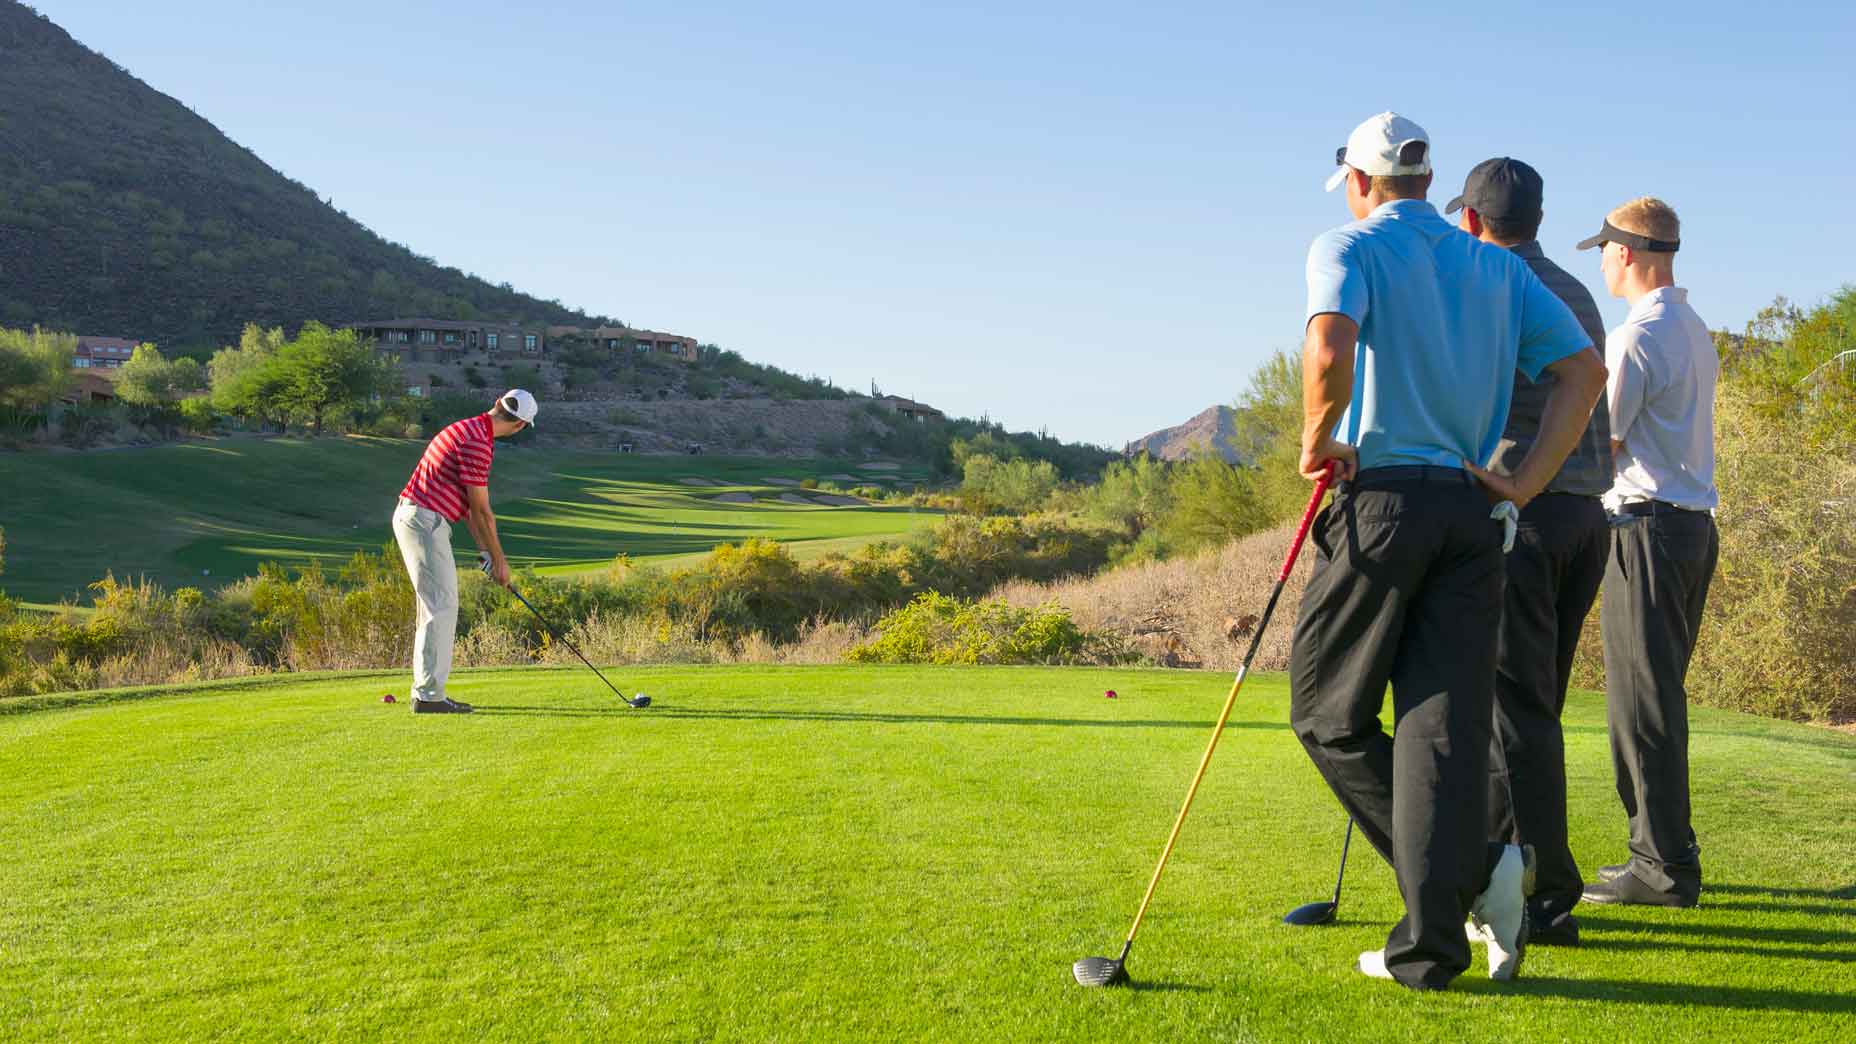 The Best Golf Games for 3 Players To Triple The Fun